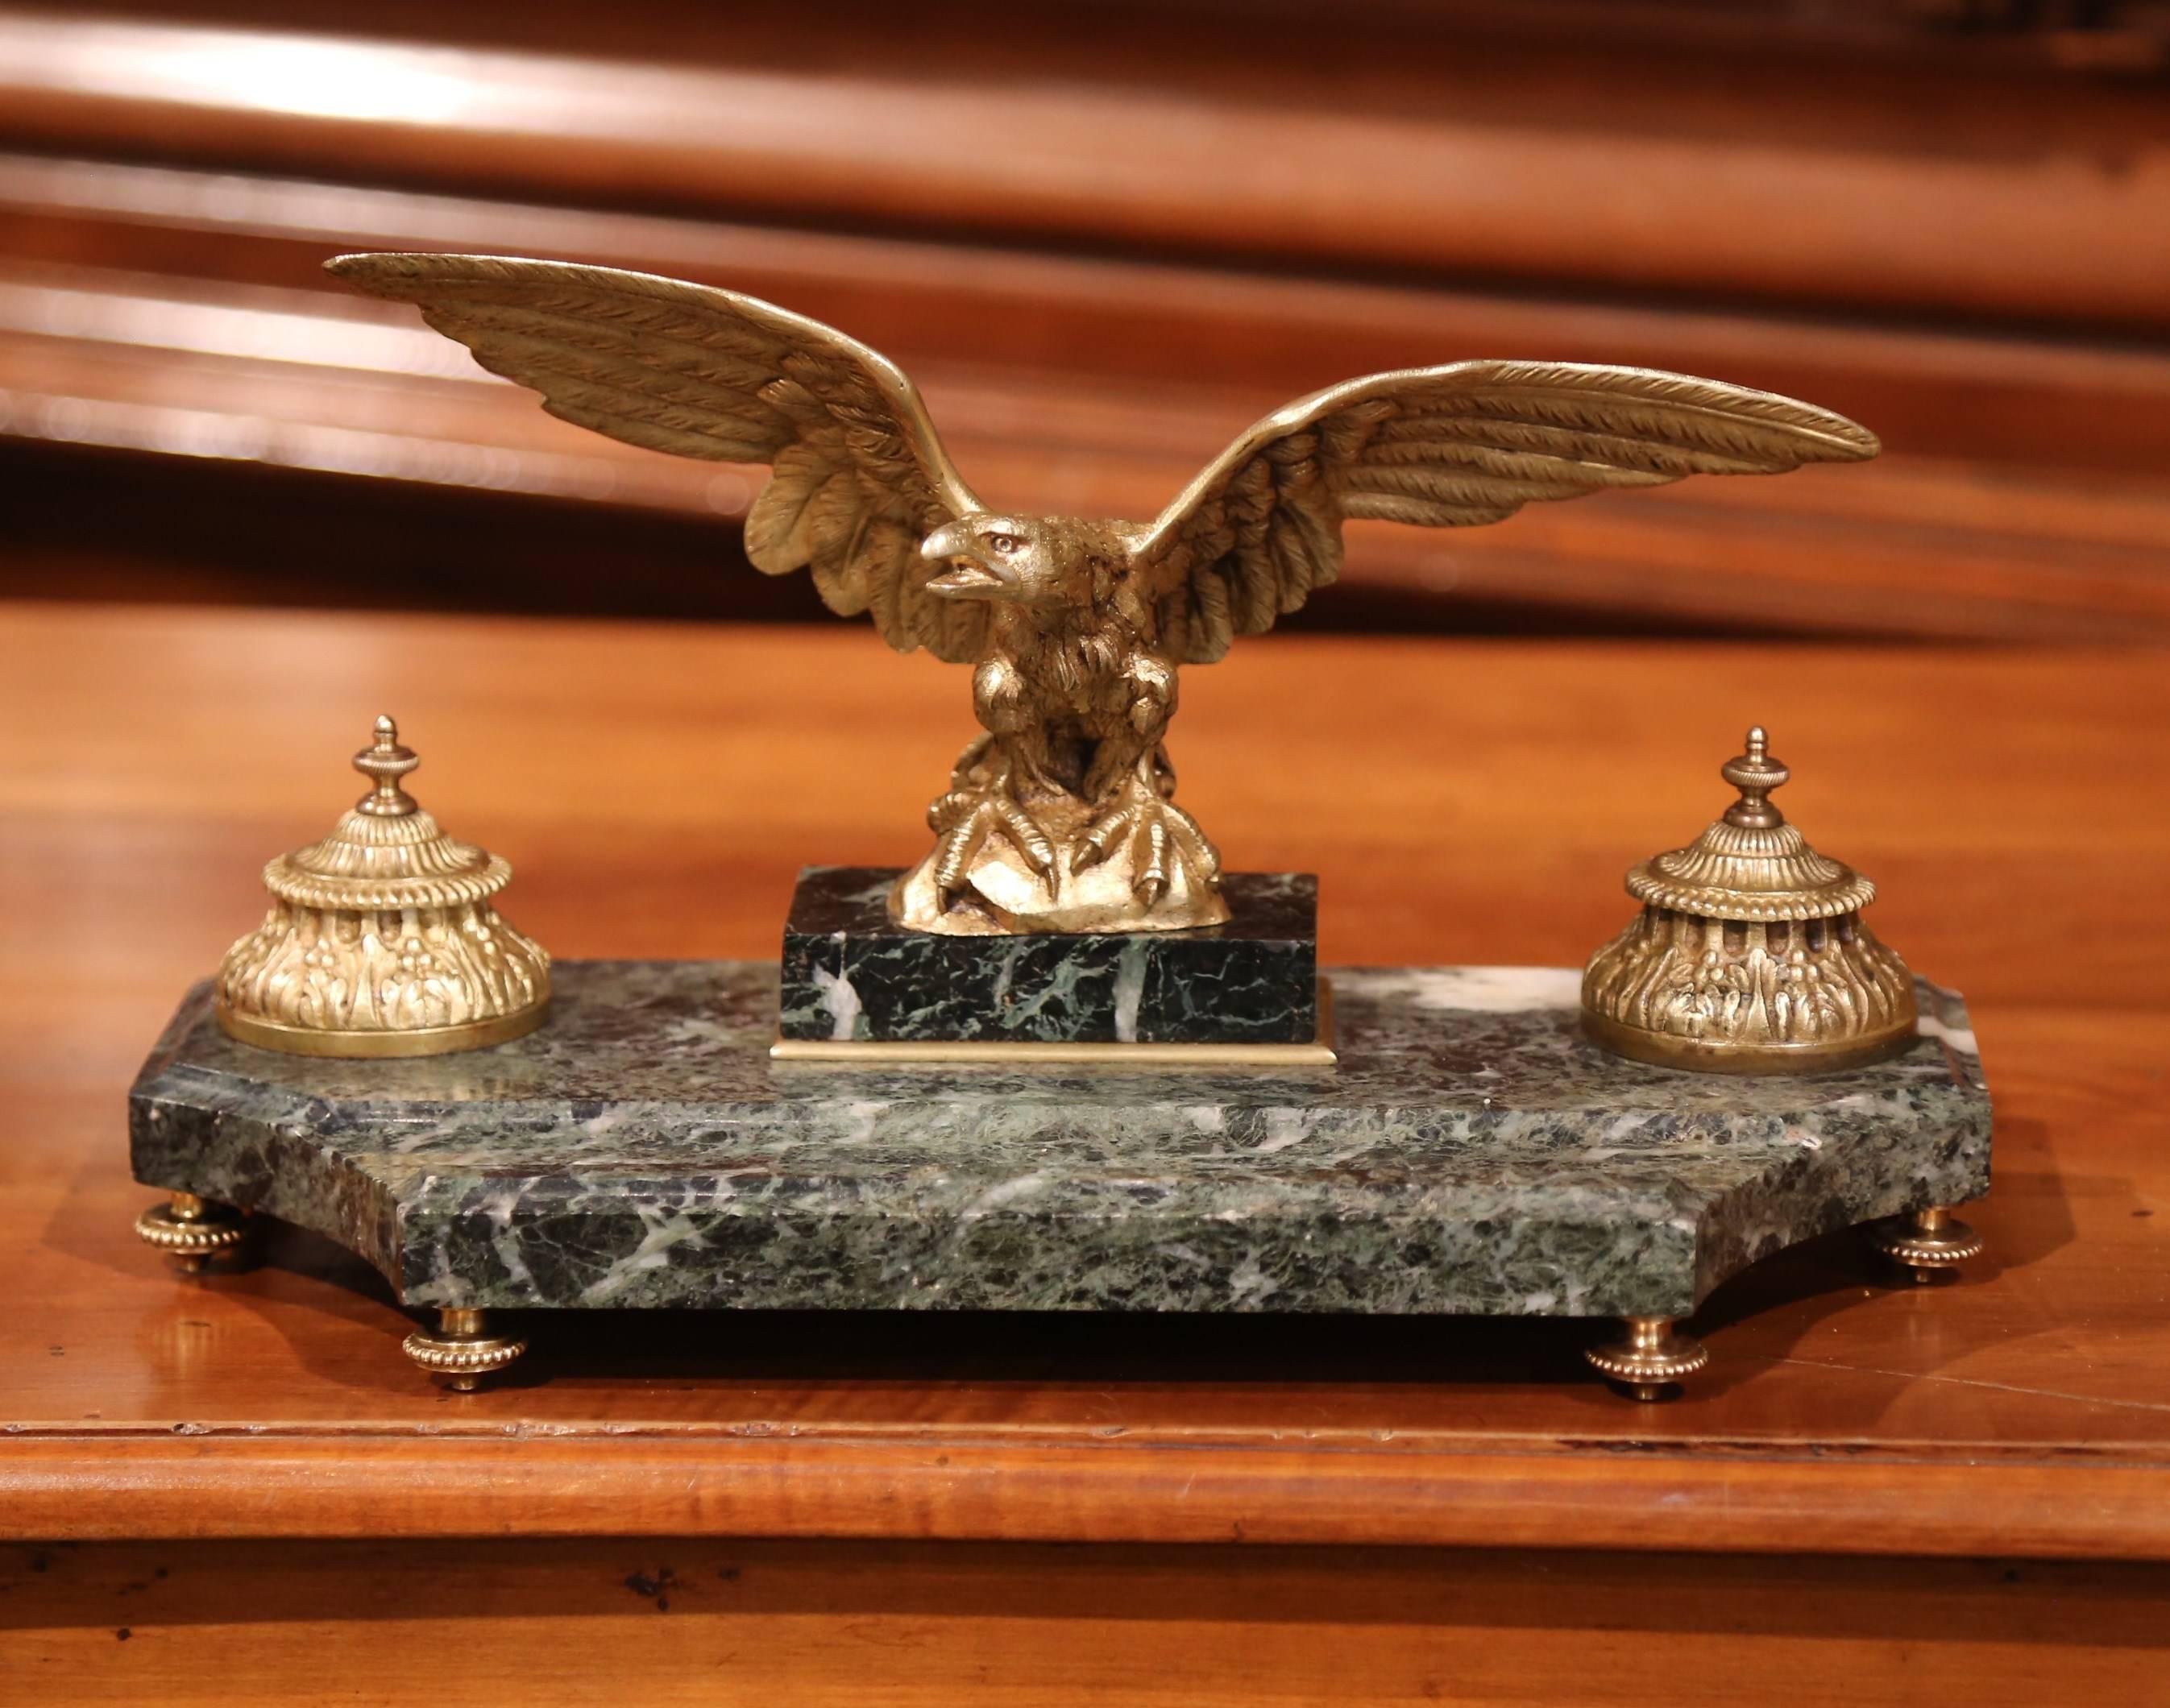 Decorate your desk or study with this large inkwell, which was crafted in France, circa 1880. Situated on a curved green marble base, the antique desk accessory features a bronze eagle with wide wings standing on a rock. On either side are two